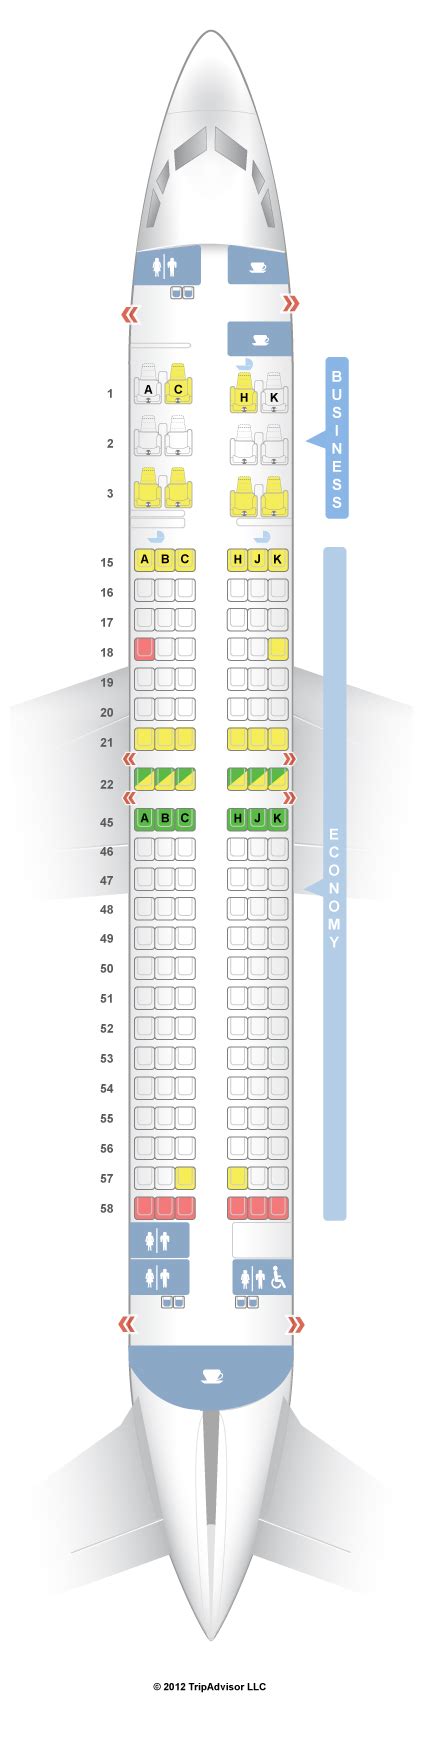 South West Boeing 737 800 Seat Map